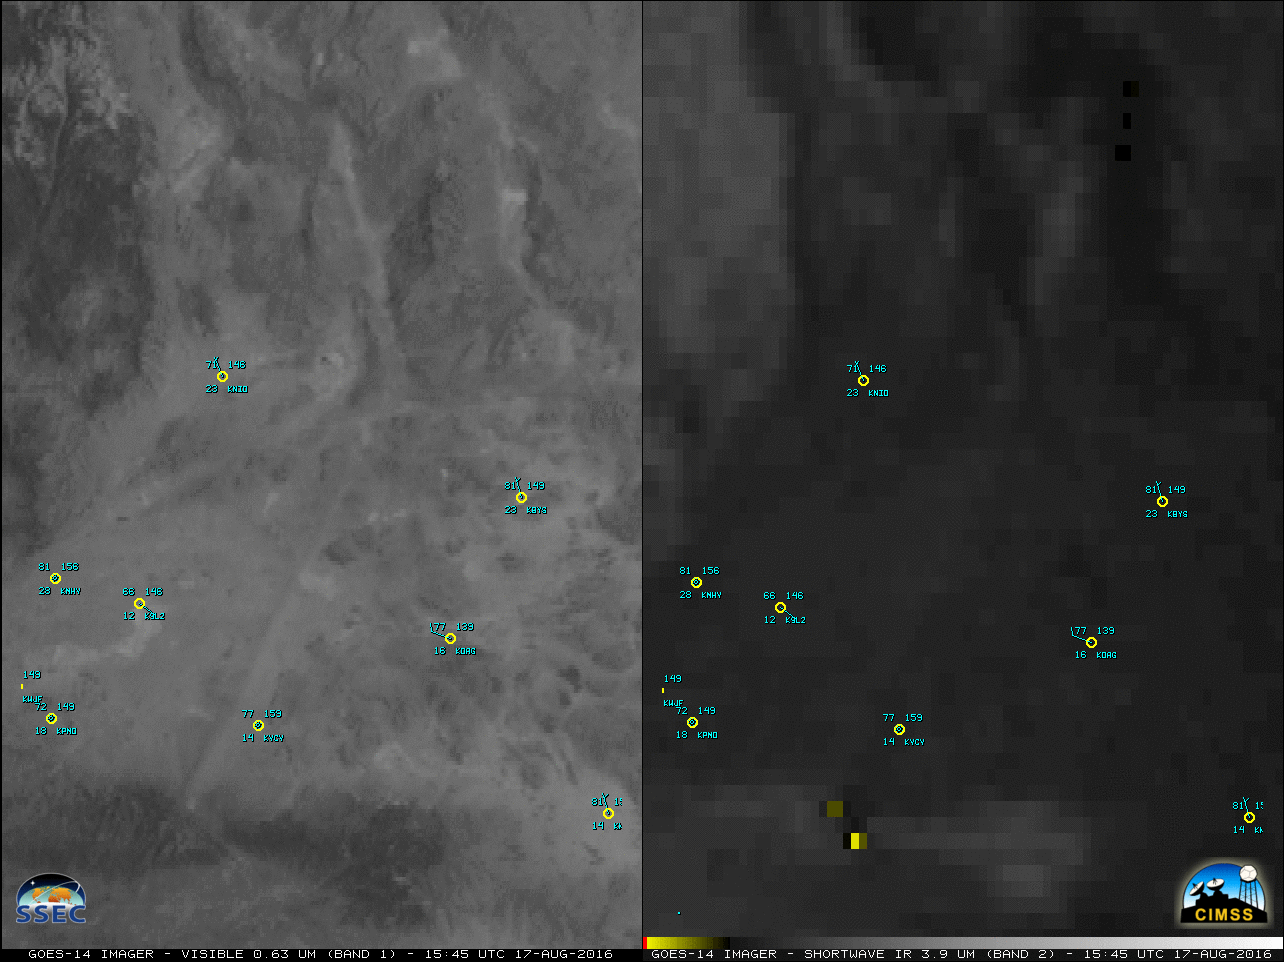 GOES-14 0.63 µm Visible (left) and 3.9 µm Shortwave Infrared (right) images, with hourly plots of surface reports in cyan/yellow [click to play MP4 animation]